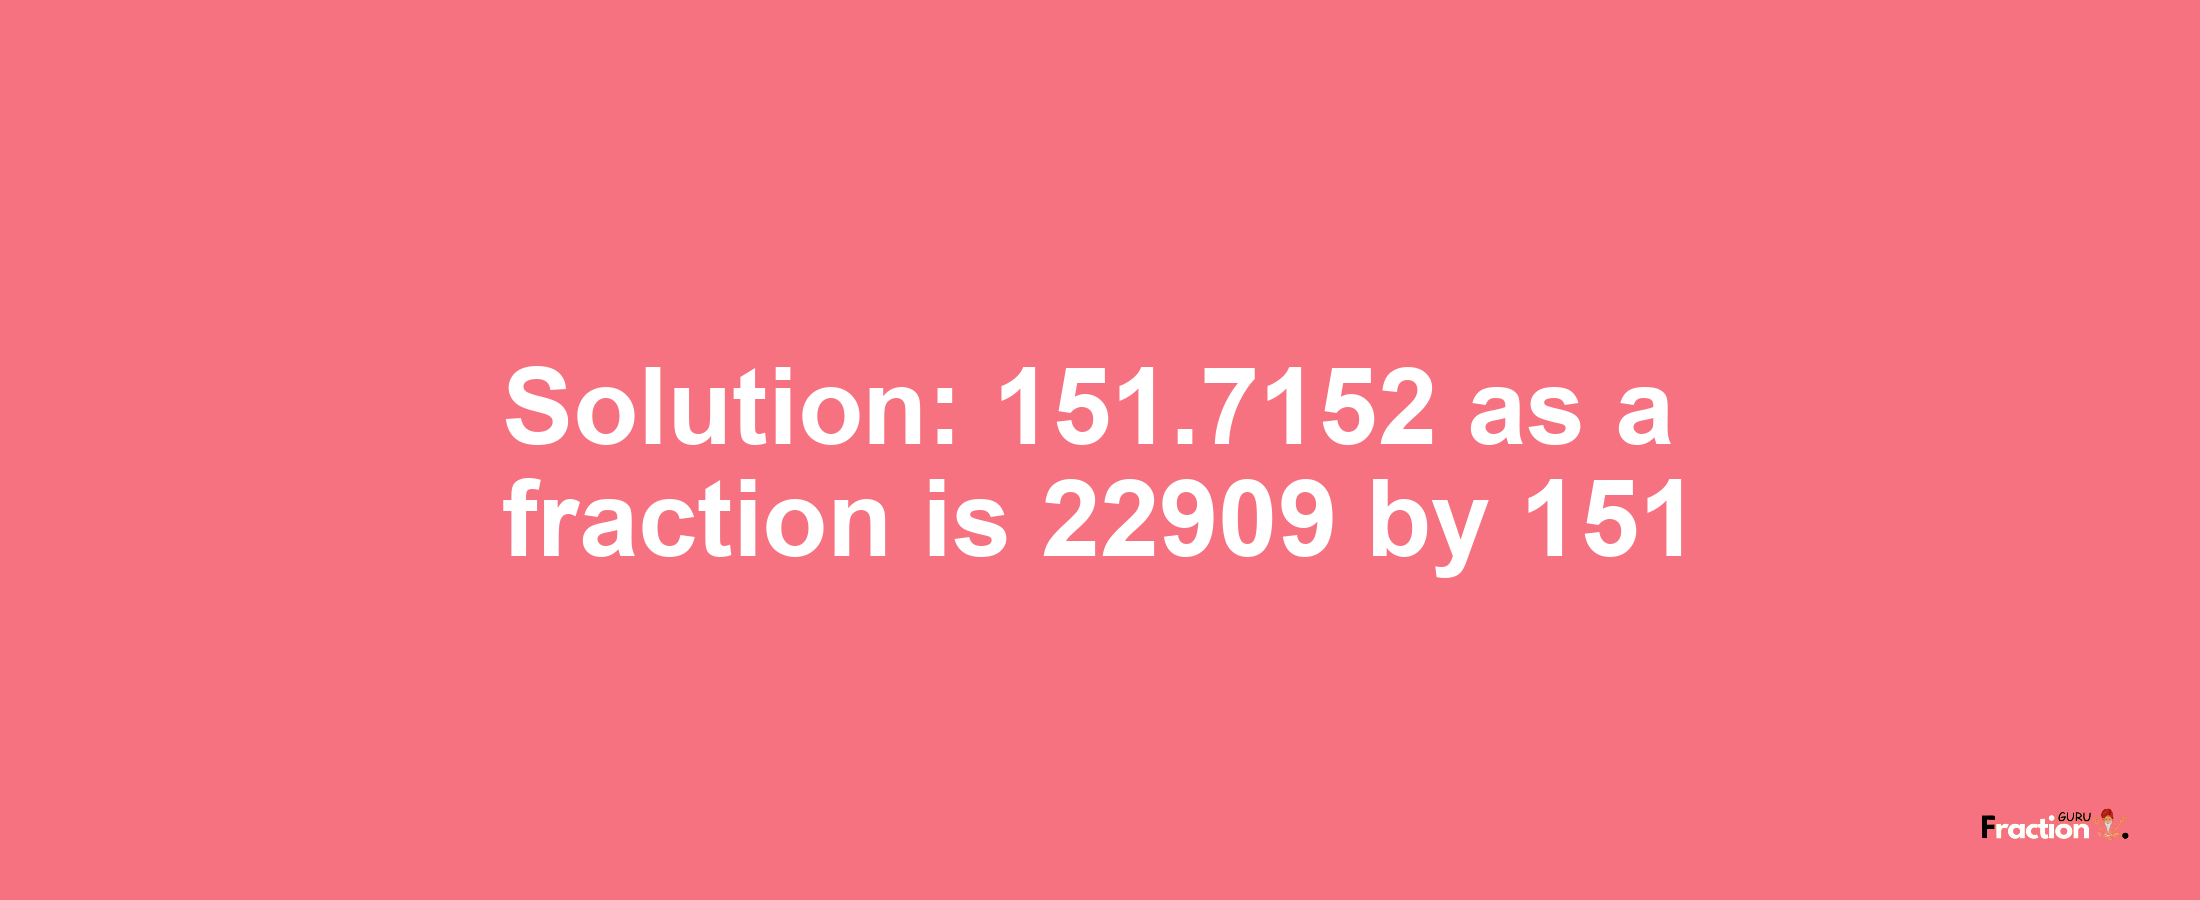 Solution:151.7152 as a fraction is 22909/151